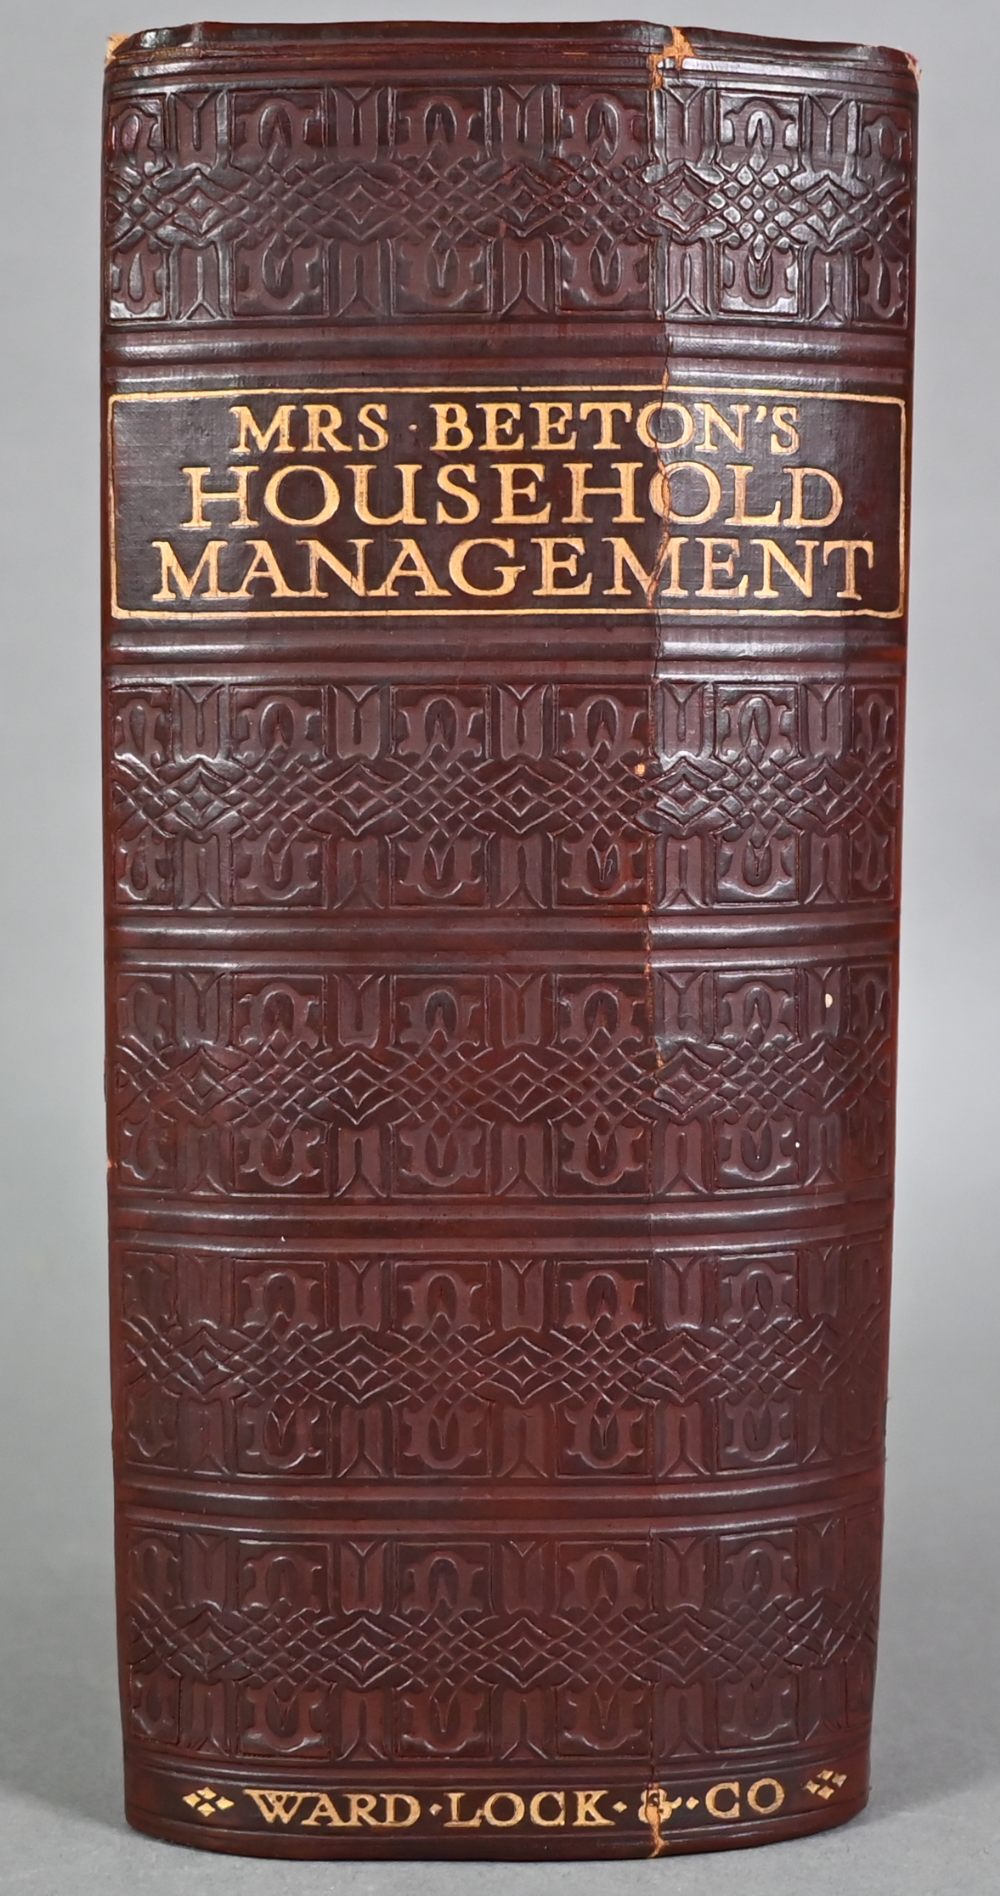 Mrs Beeton's Household Management, New Edition, quarter-bound in American cloth, 8vo - Image 2 of 5